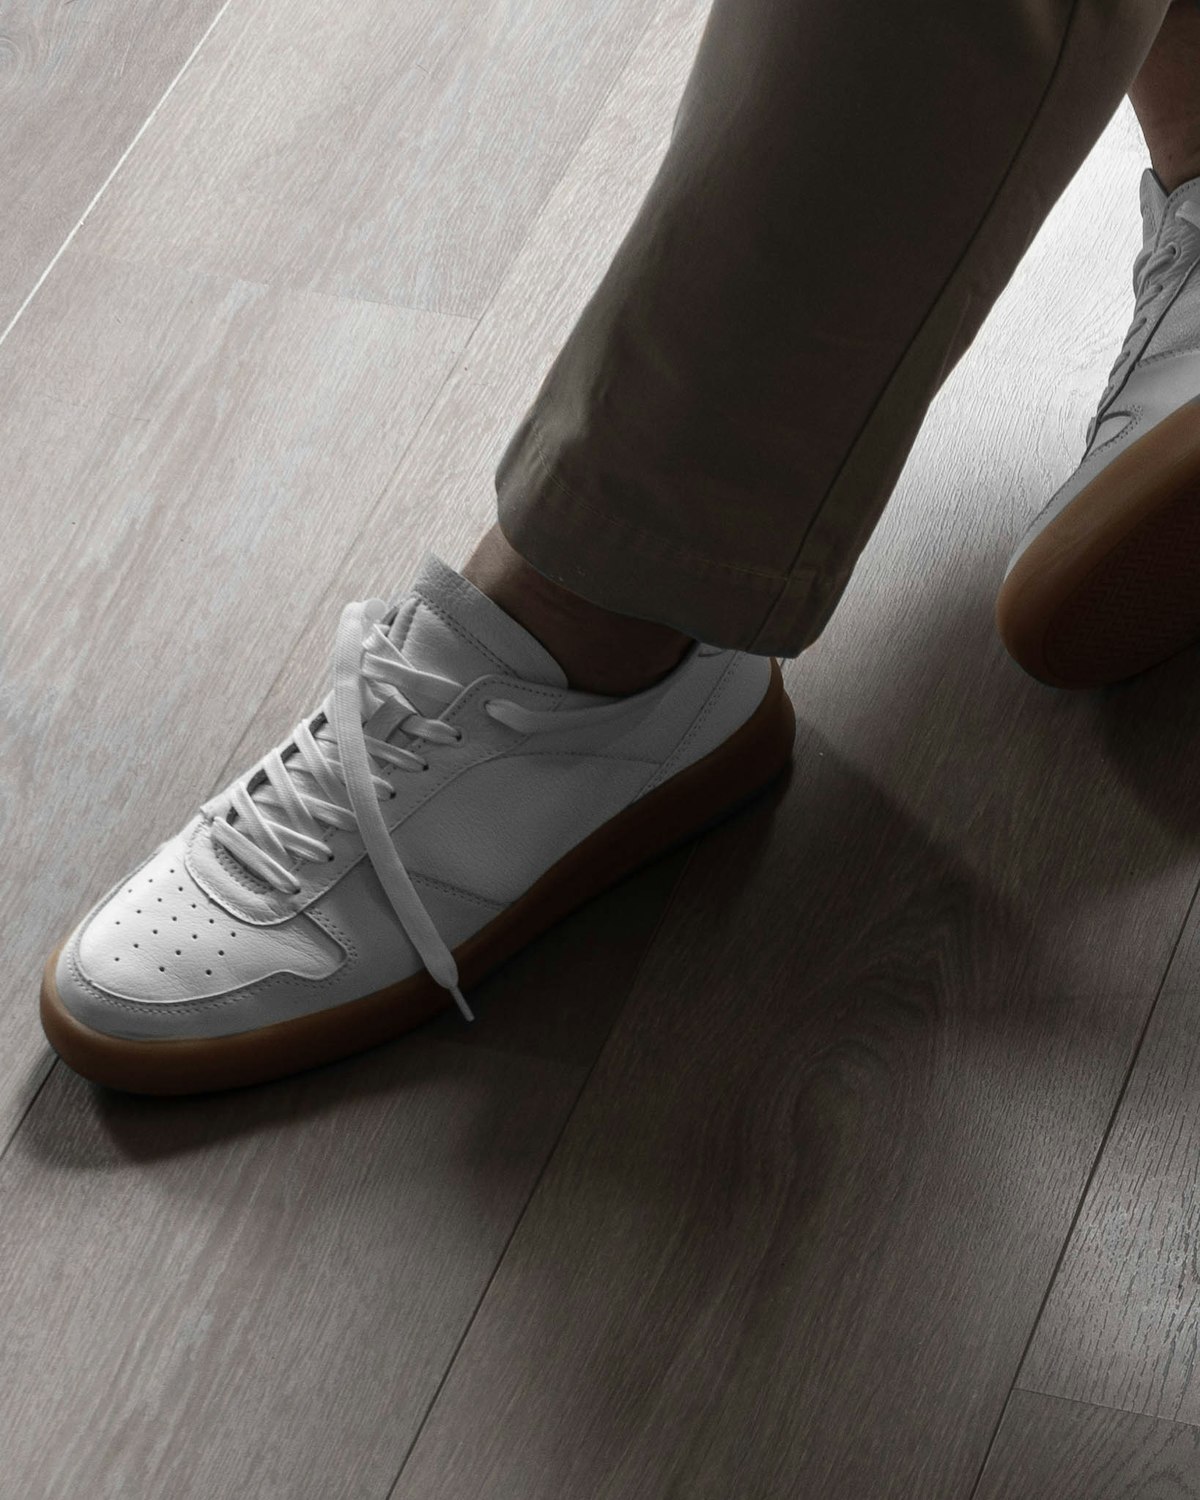 VOR premium sneakers made in Germany – interview with founders Andreas & Joerg